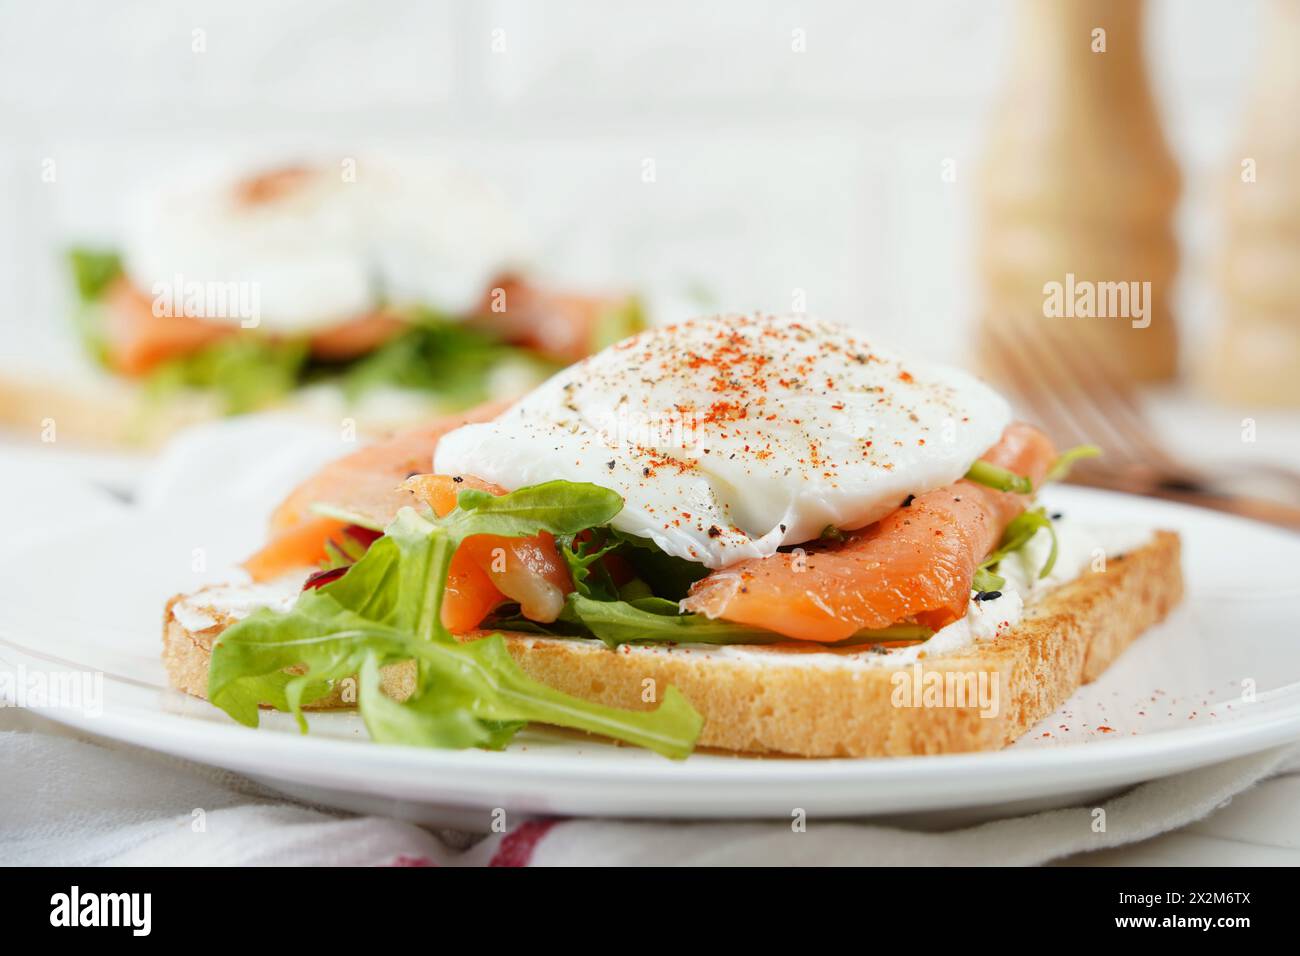 Eggs Benedict with smoked salmon, herbs, and hollandaise sauce Stock Photo